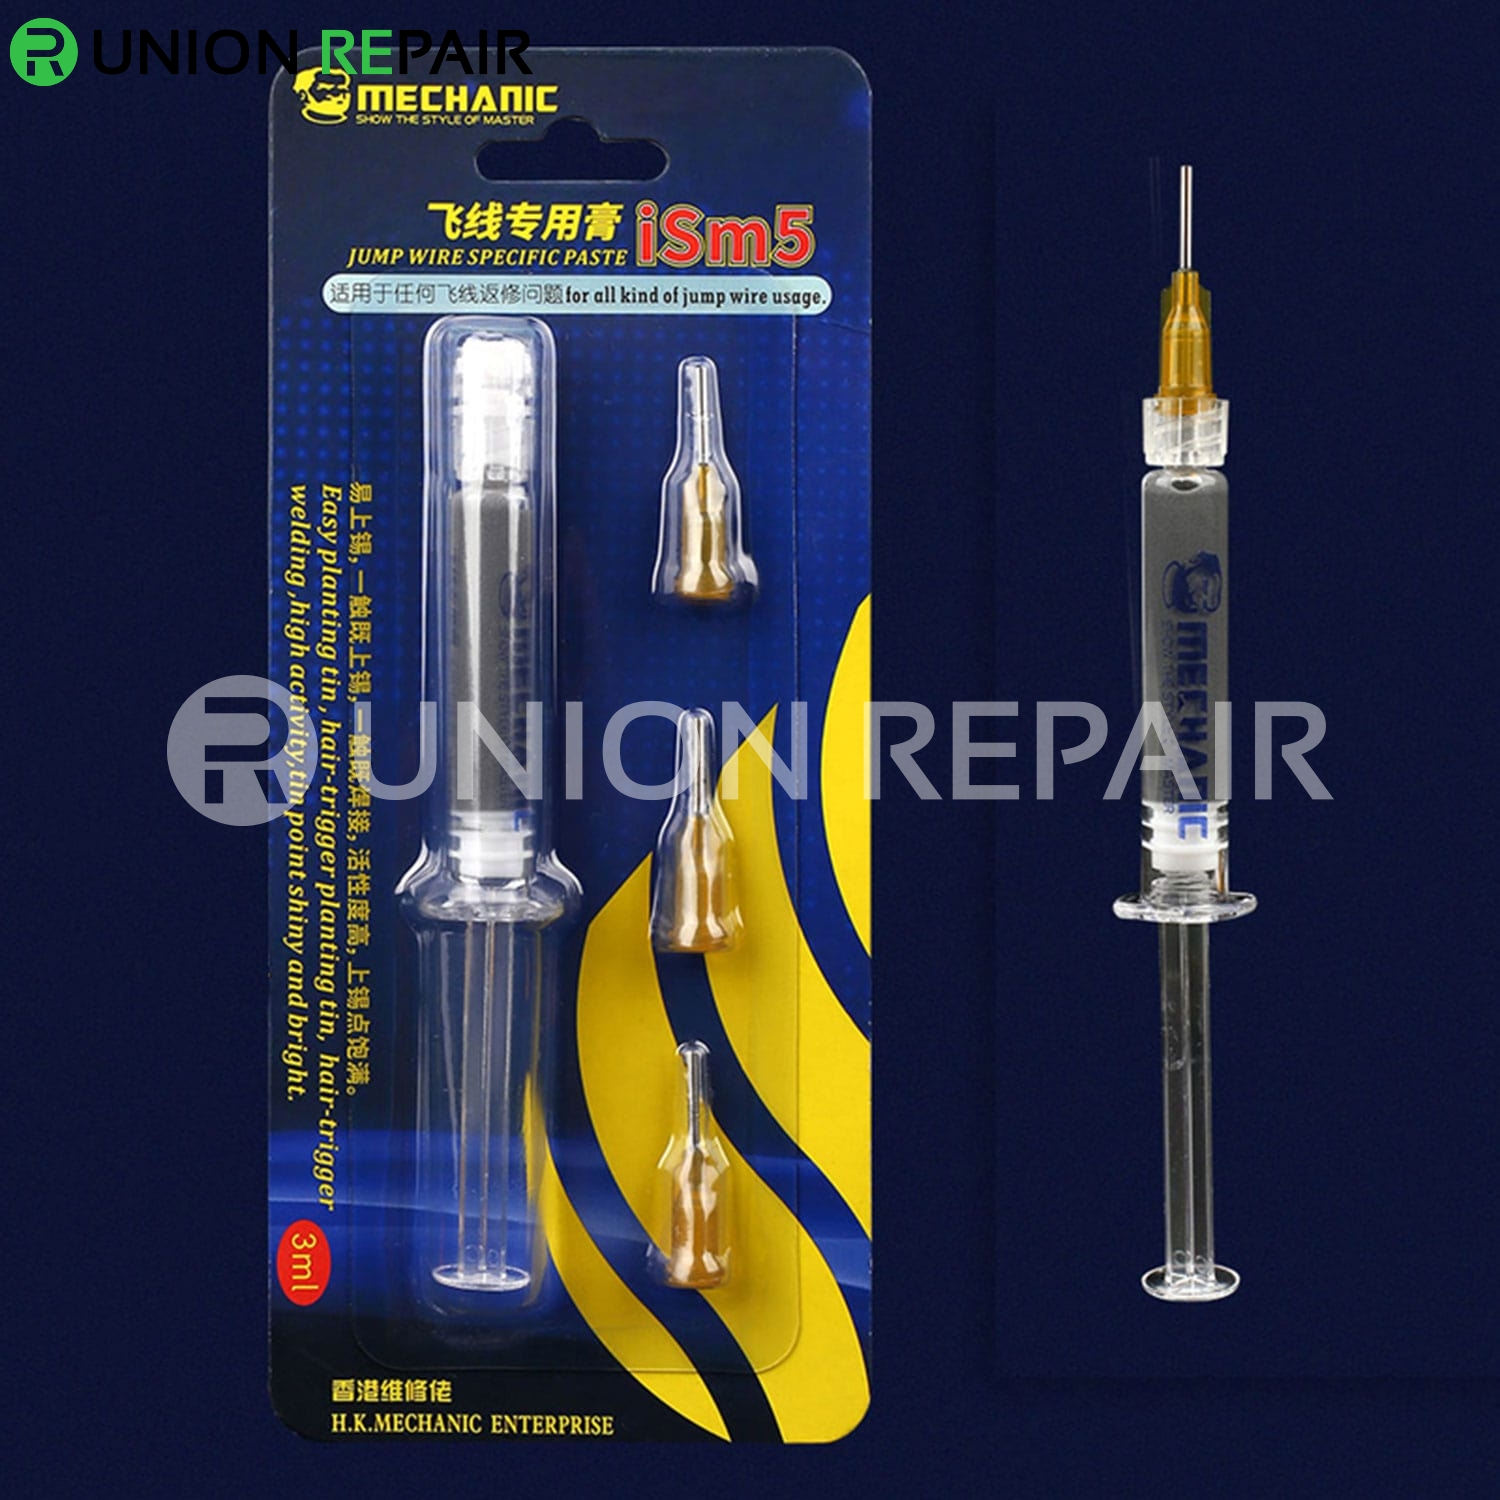 Mechanic iSm3 iSm5 Special Solder Paste ‏for Phone Jumper Wire